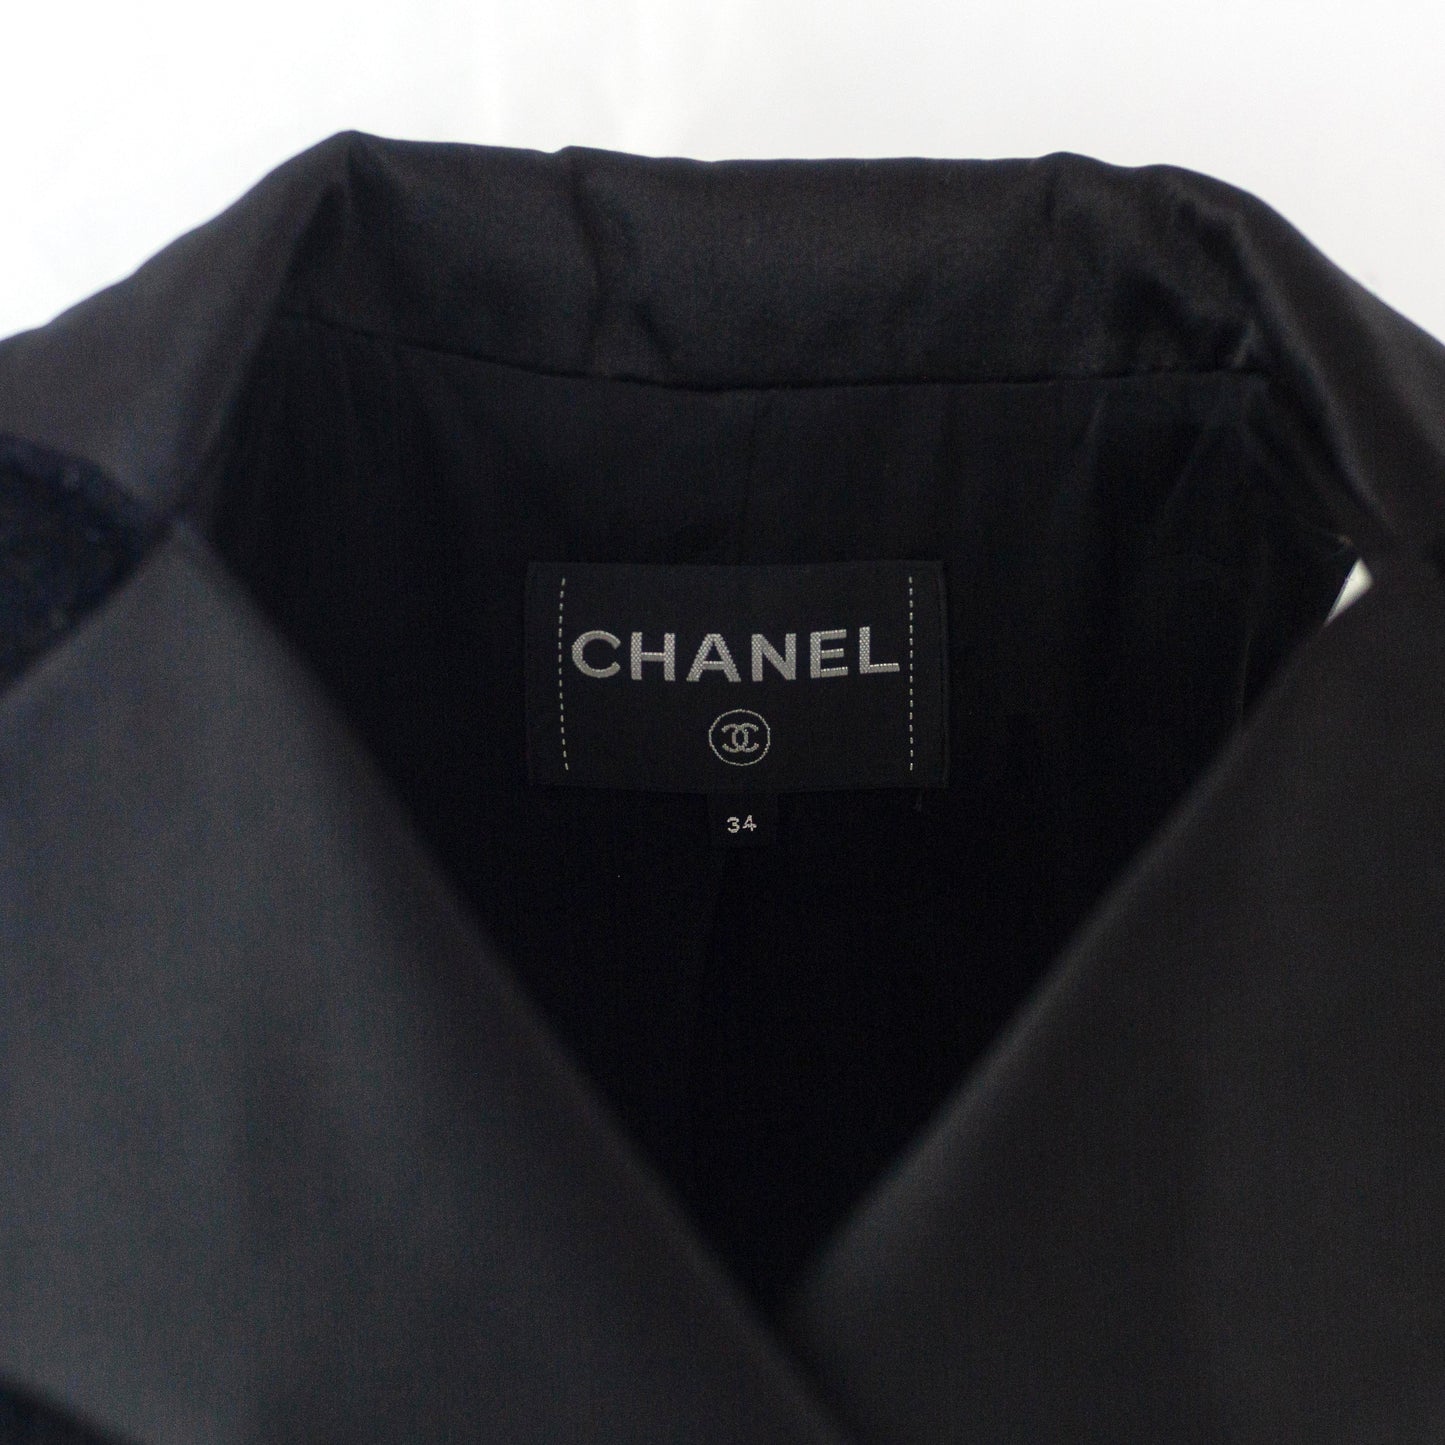 CHANEL - RUNWAY JACKET DOUBLE BREAST BLACK WITH SILK SATIN WIDE LAPEL SIZE 34 FR FROM COLLECTION FALL/WINTER 2019